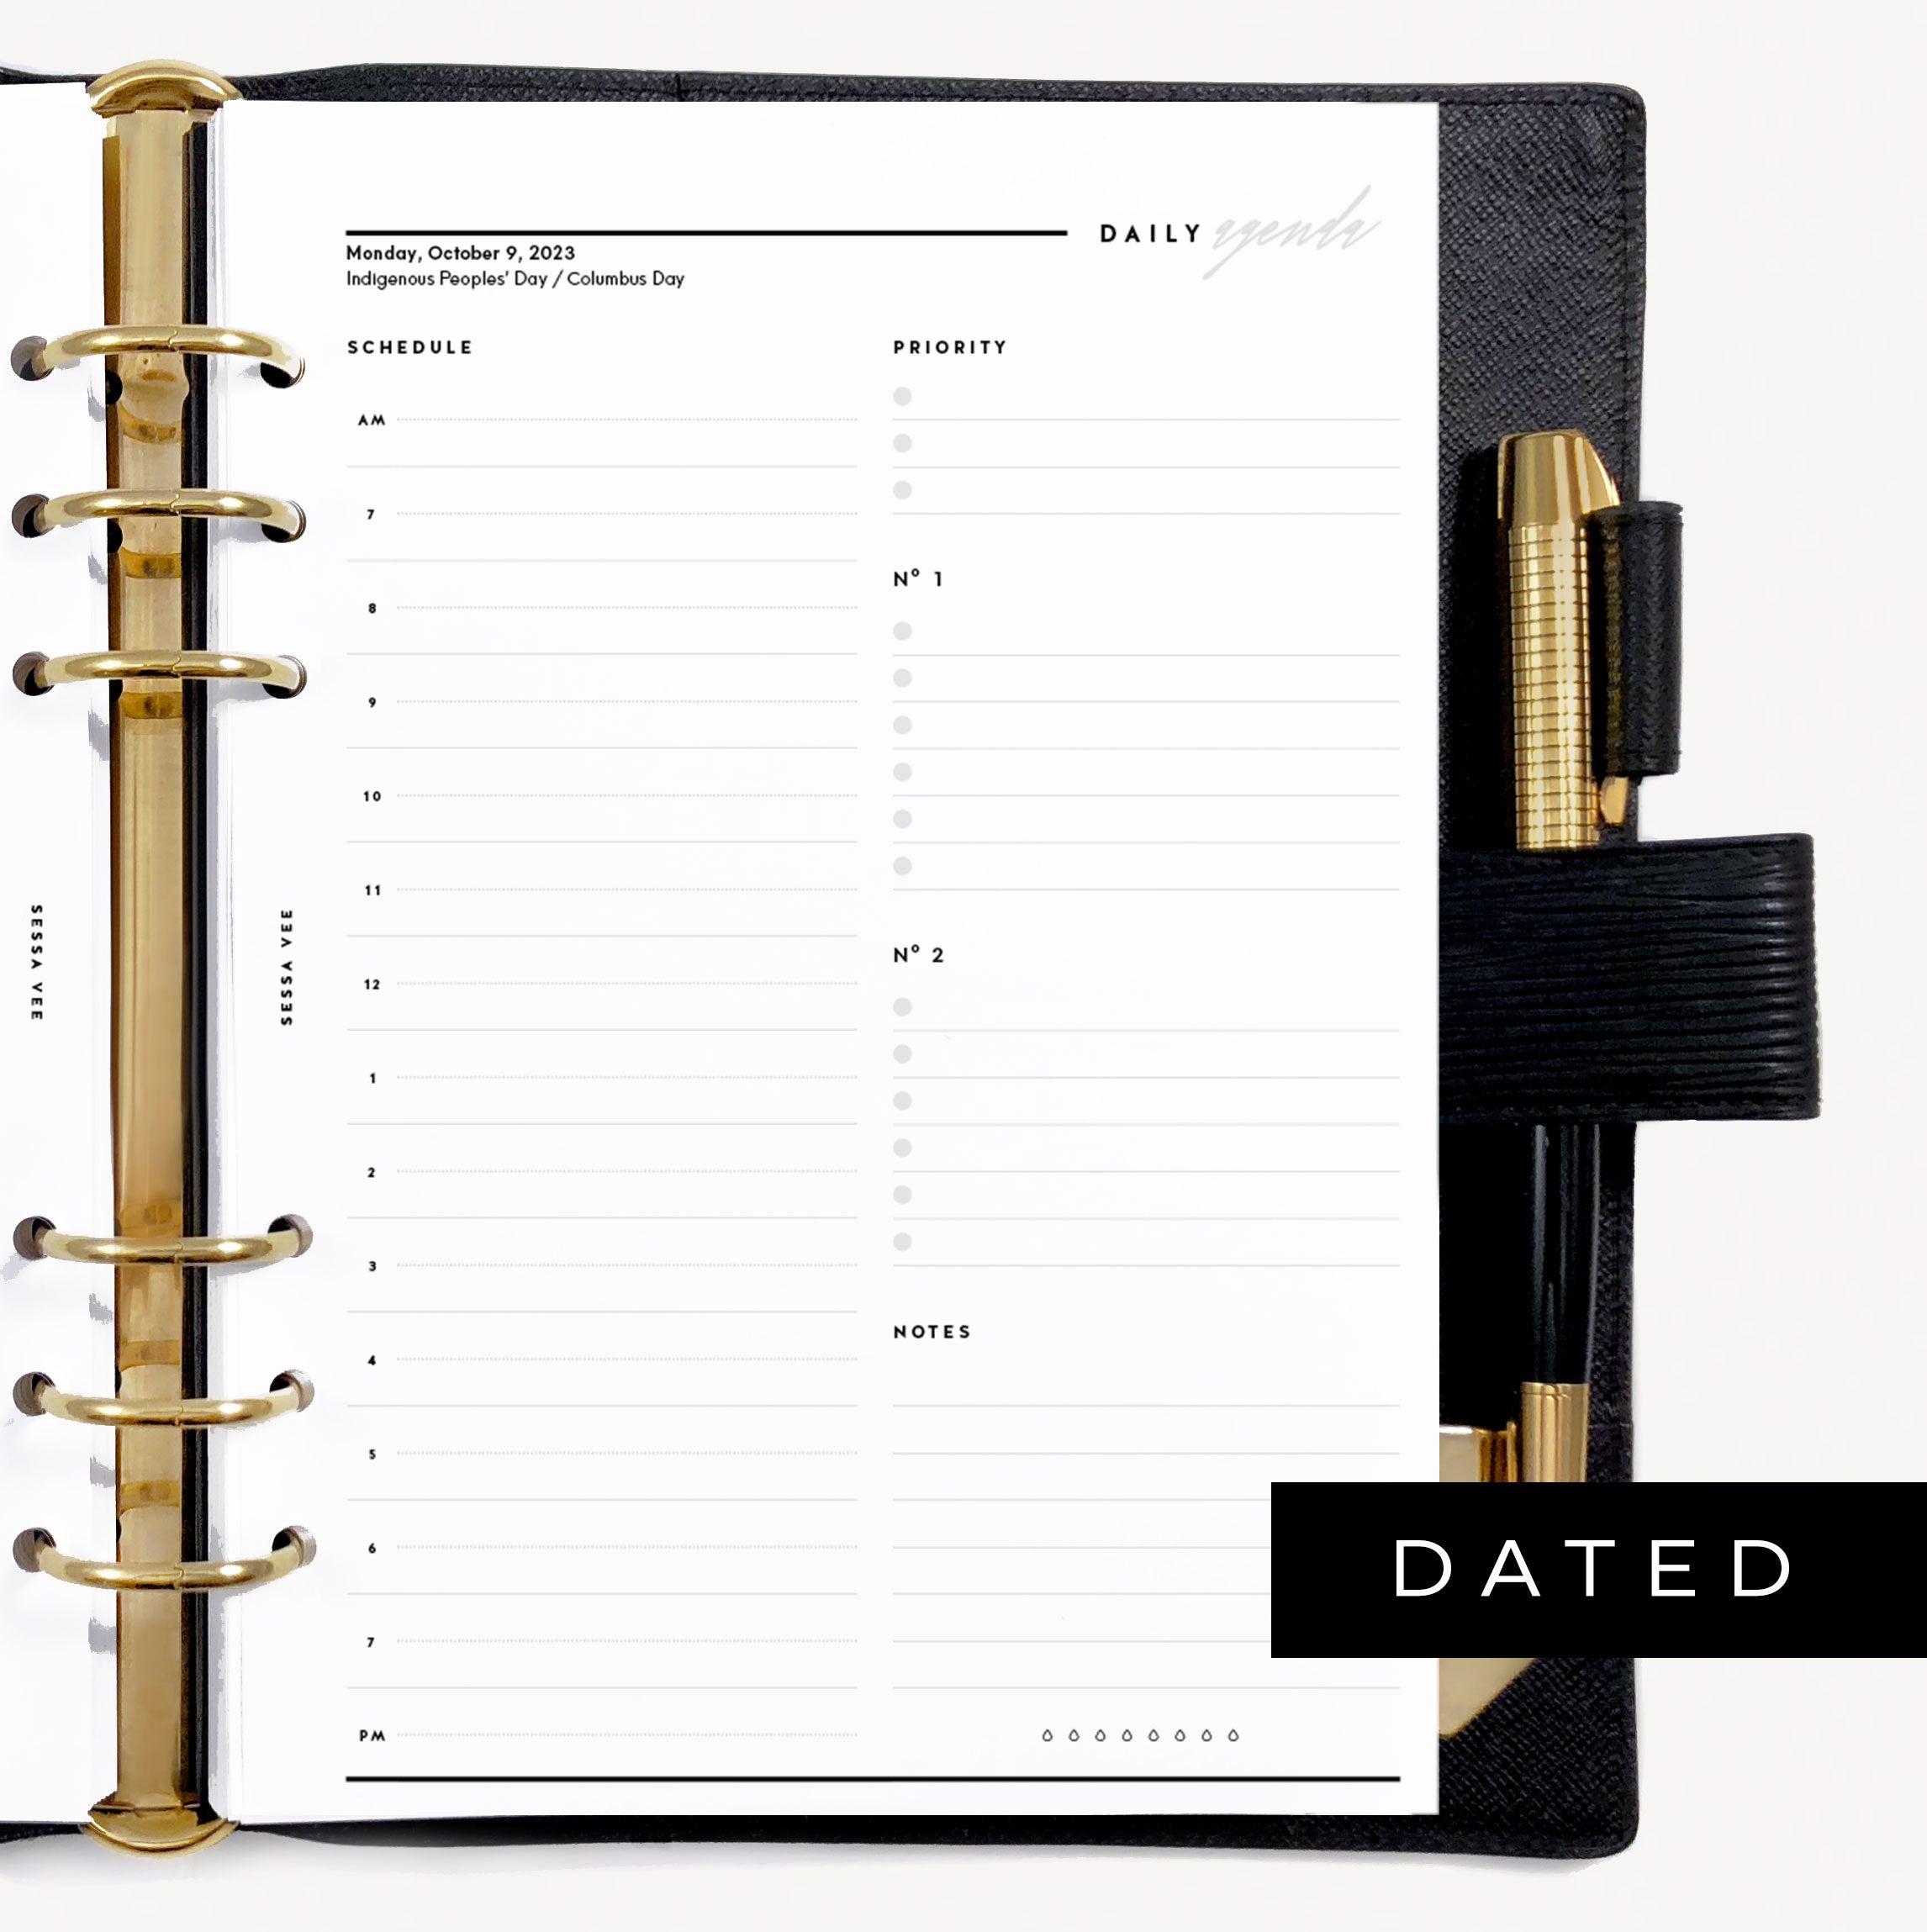 Hourly/Daily Planner Inserts for A5 Planners 